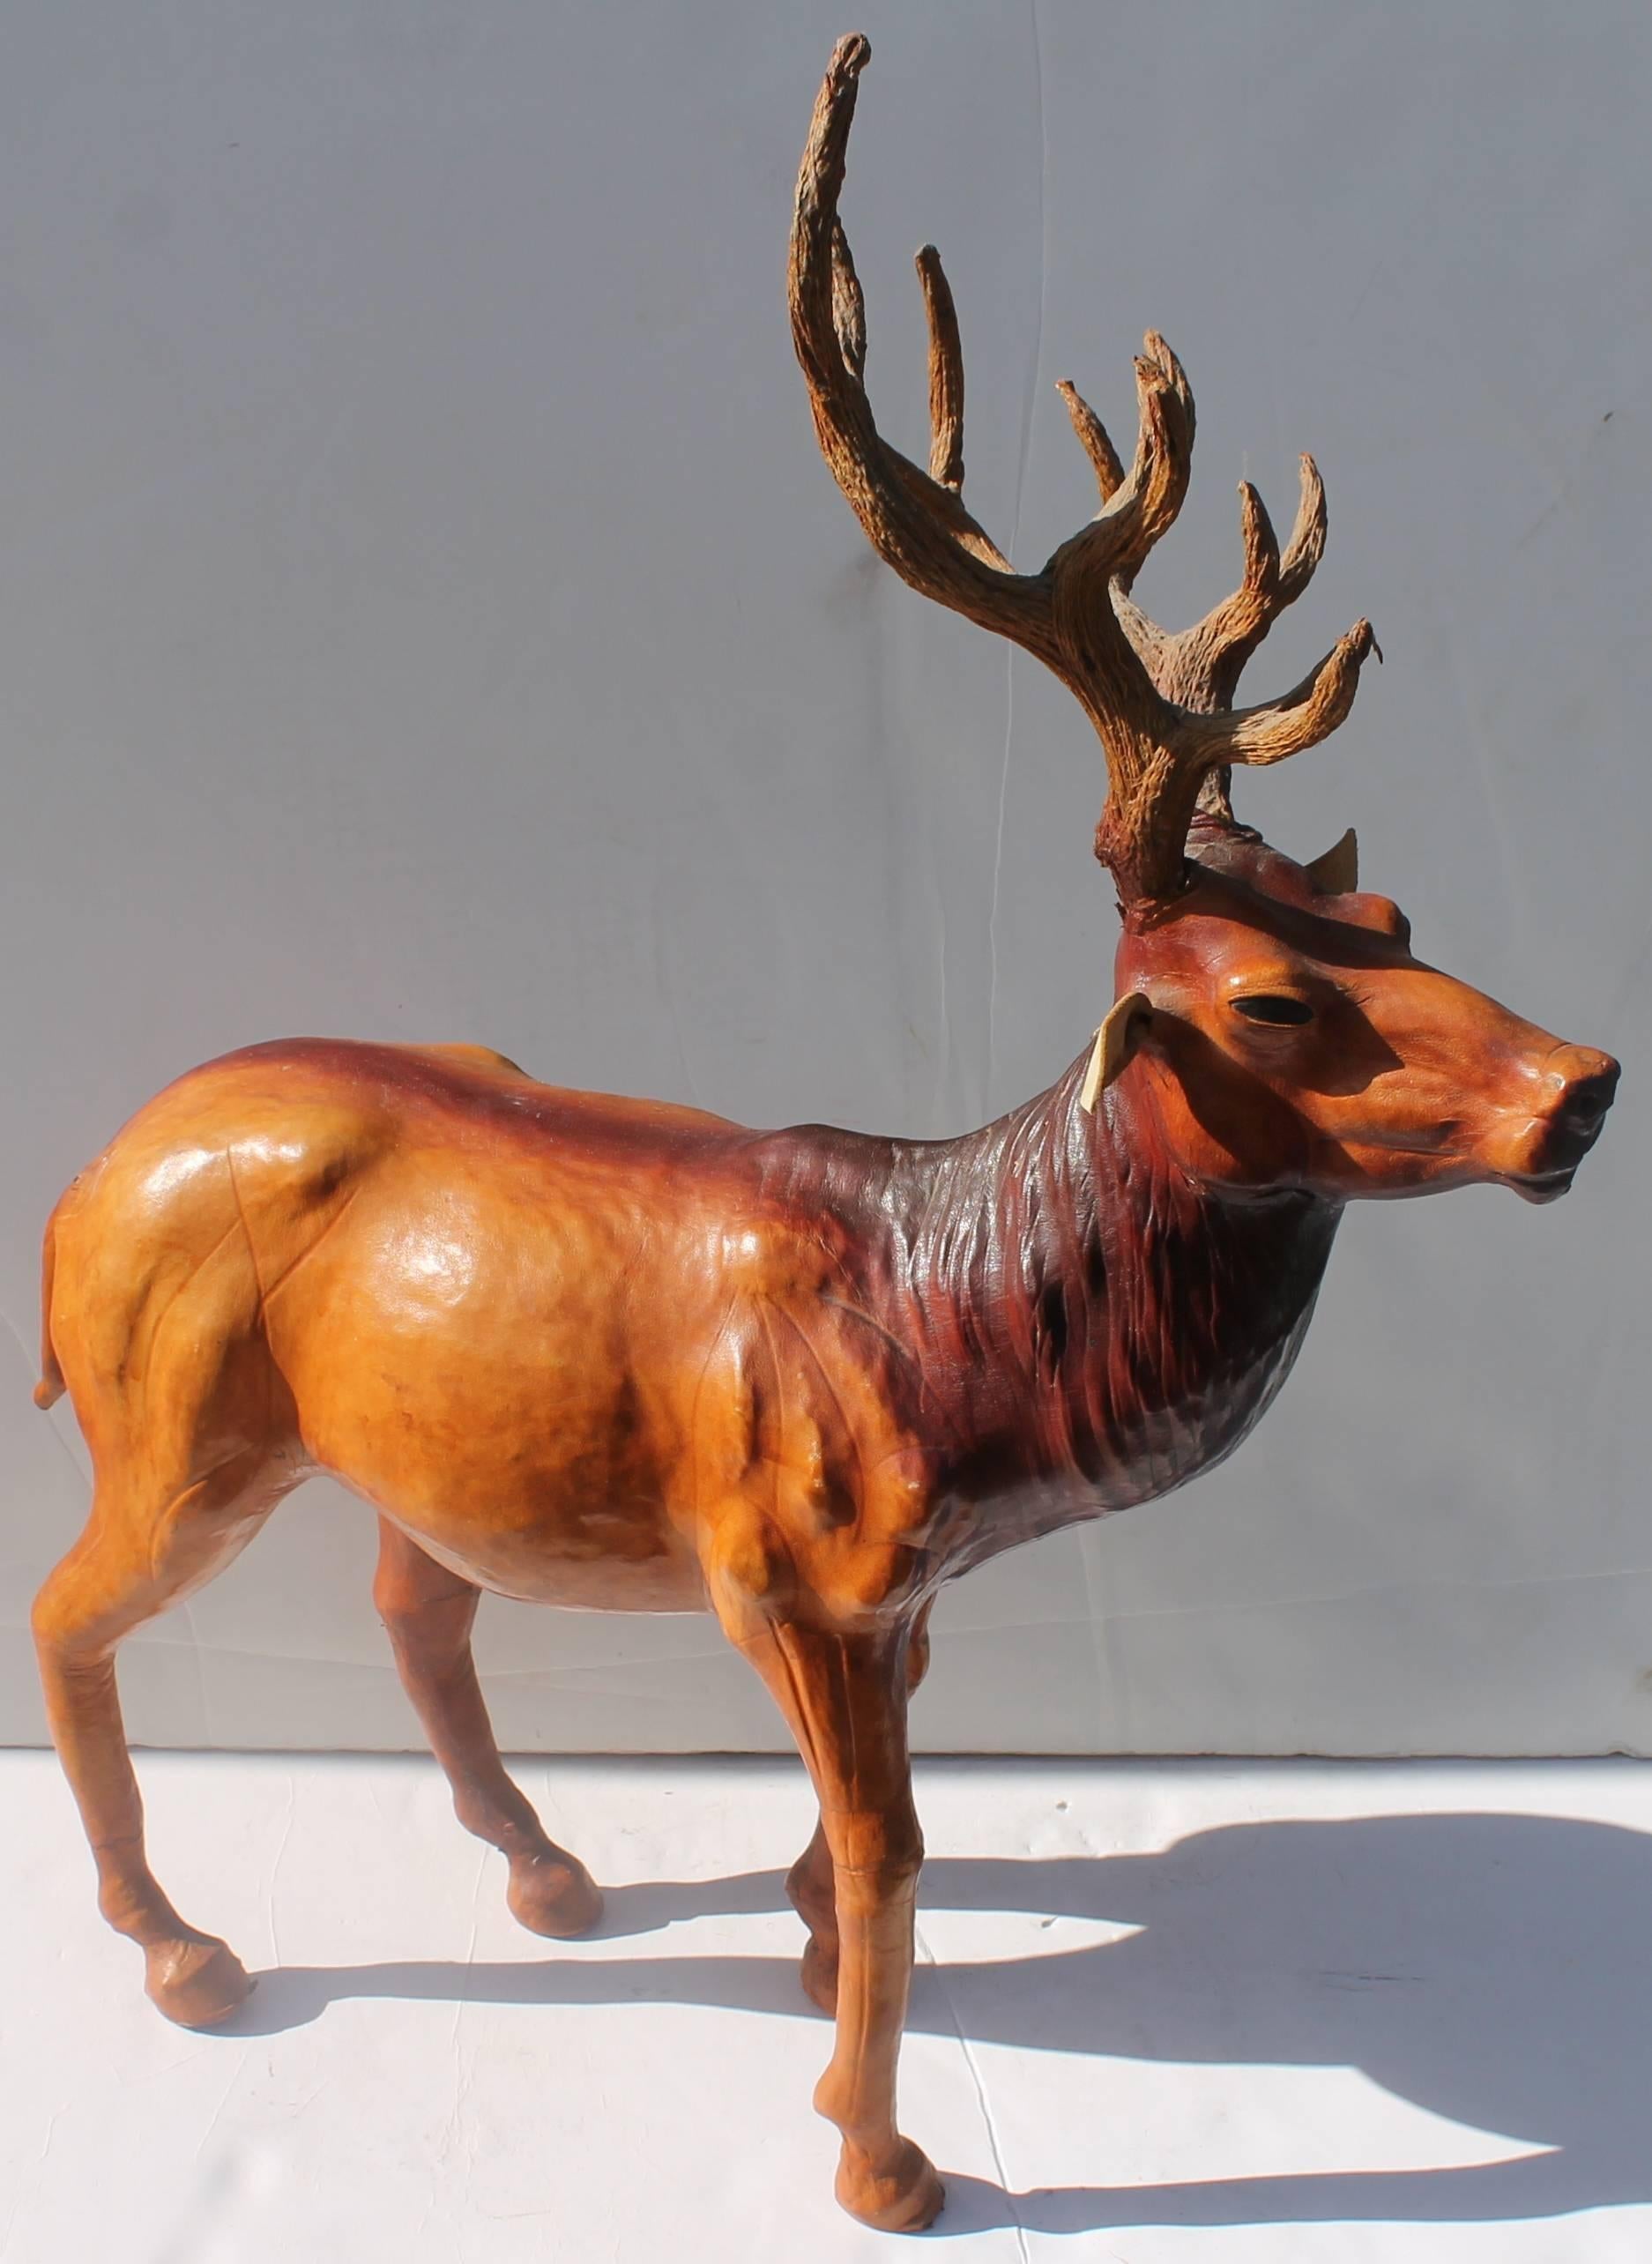 This handmade hollow body leather elk has leather horns and cool glass eyes. Condition is very good. This is most unusual as you usually just see leather horses made in this format.